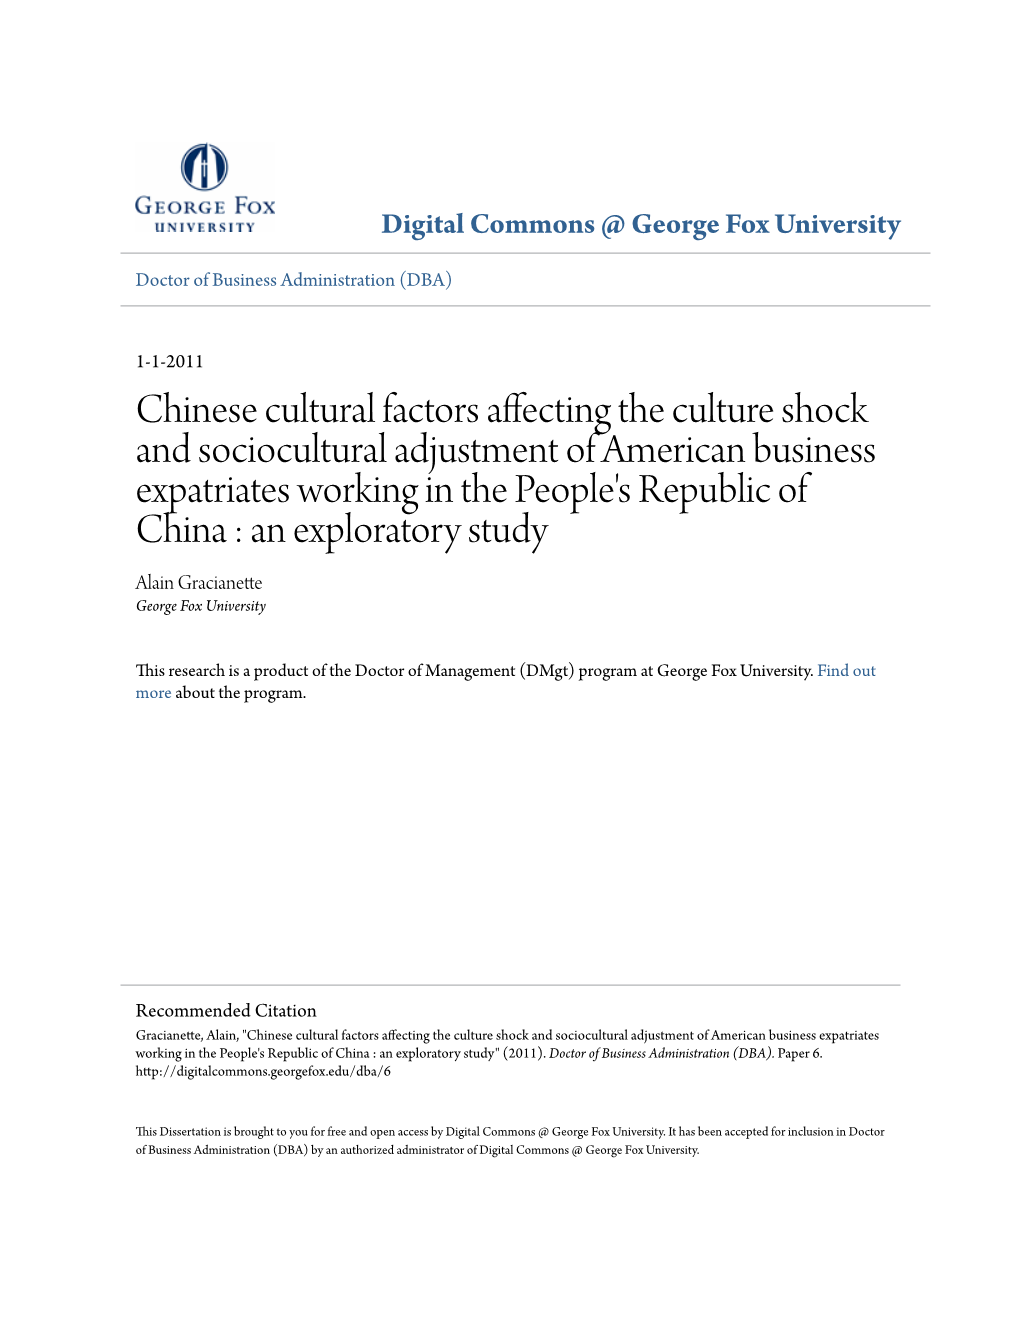 Chinese Cultural Factors Affecting the Culture Shock and Sociocultural